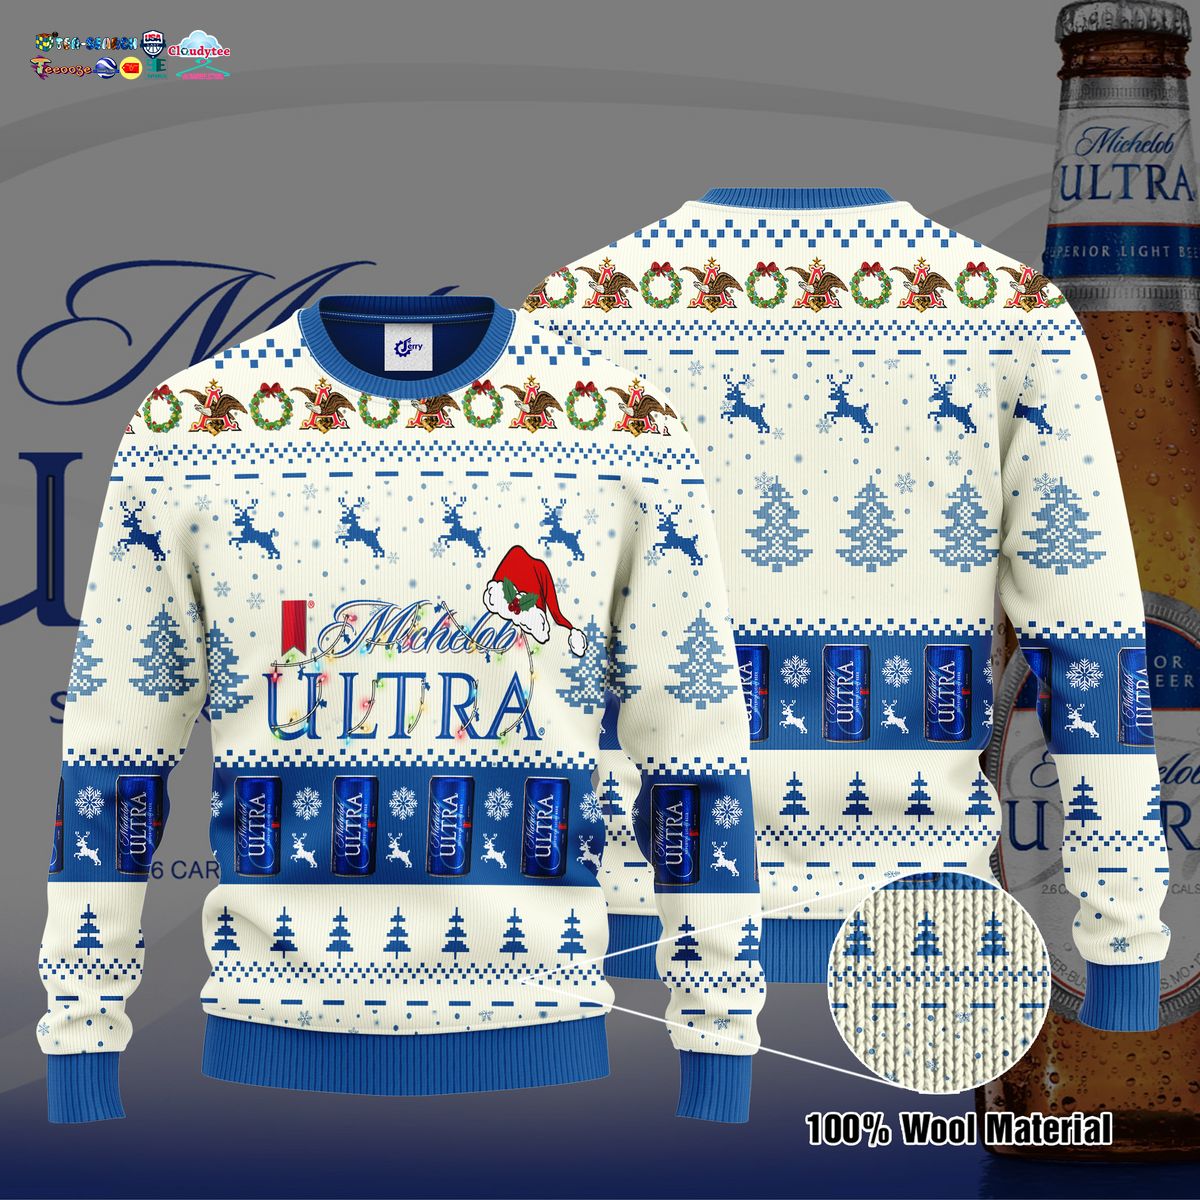 Michelob Ultra Santa Hat Ugly Christmas Sweater - Which place is this bro?